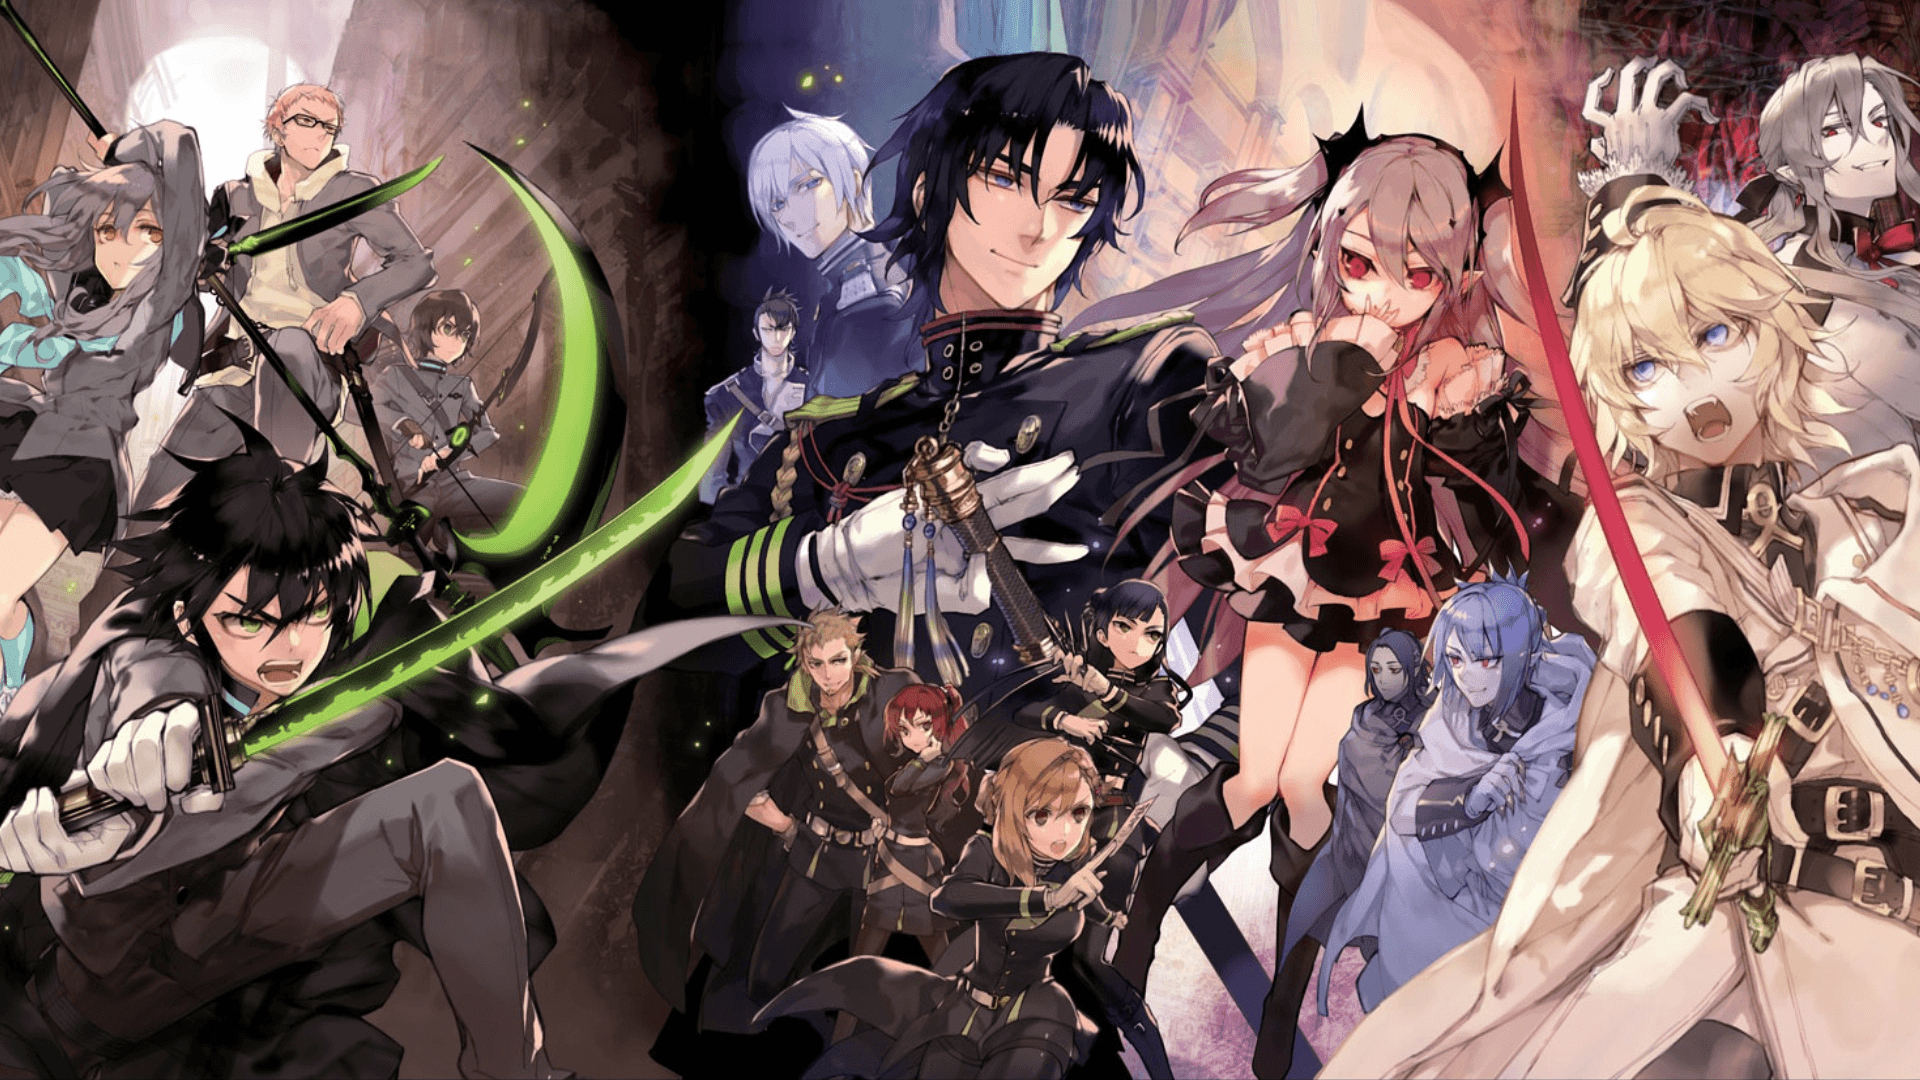 1920x1080 Seraph Of The End Wallpapers